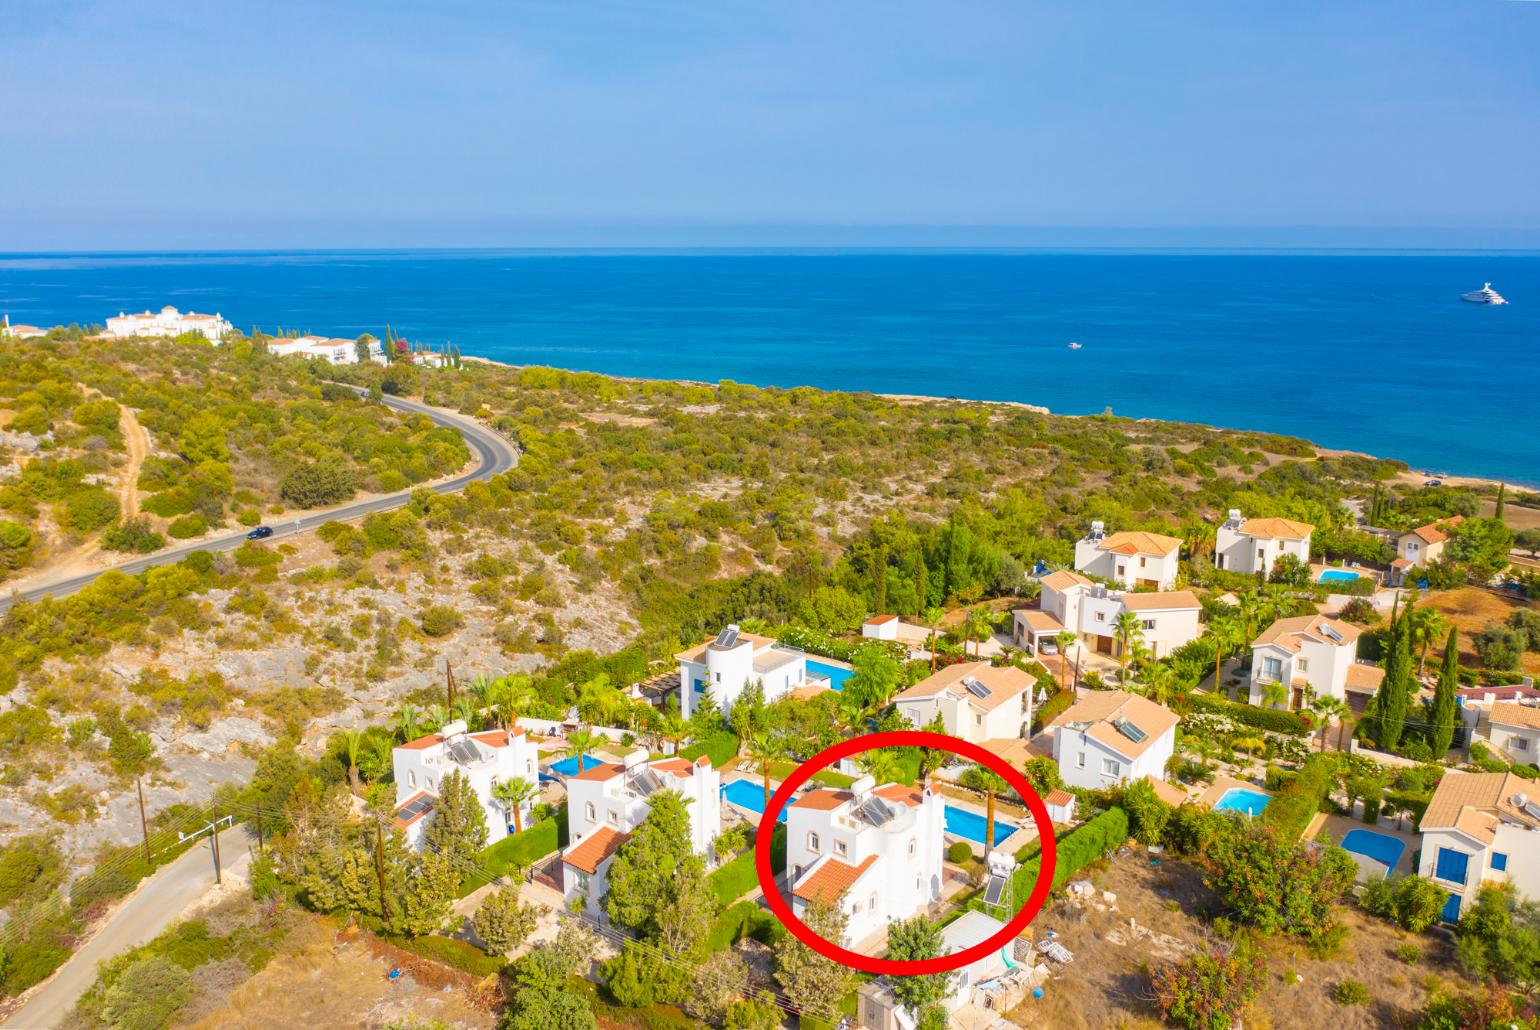 Aerial view showing location of Villa Cleopatra